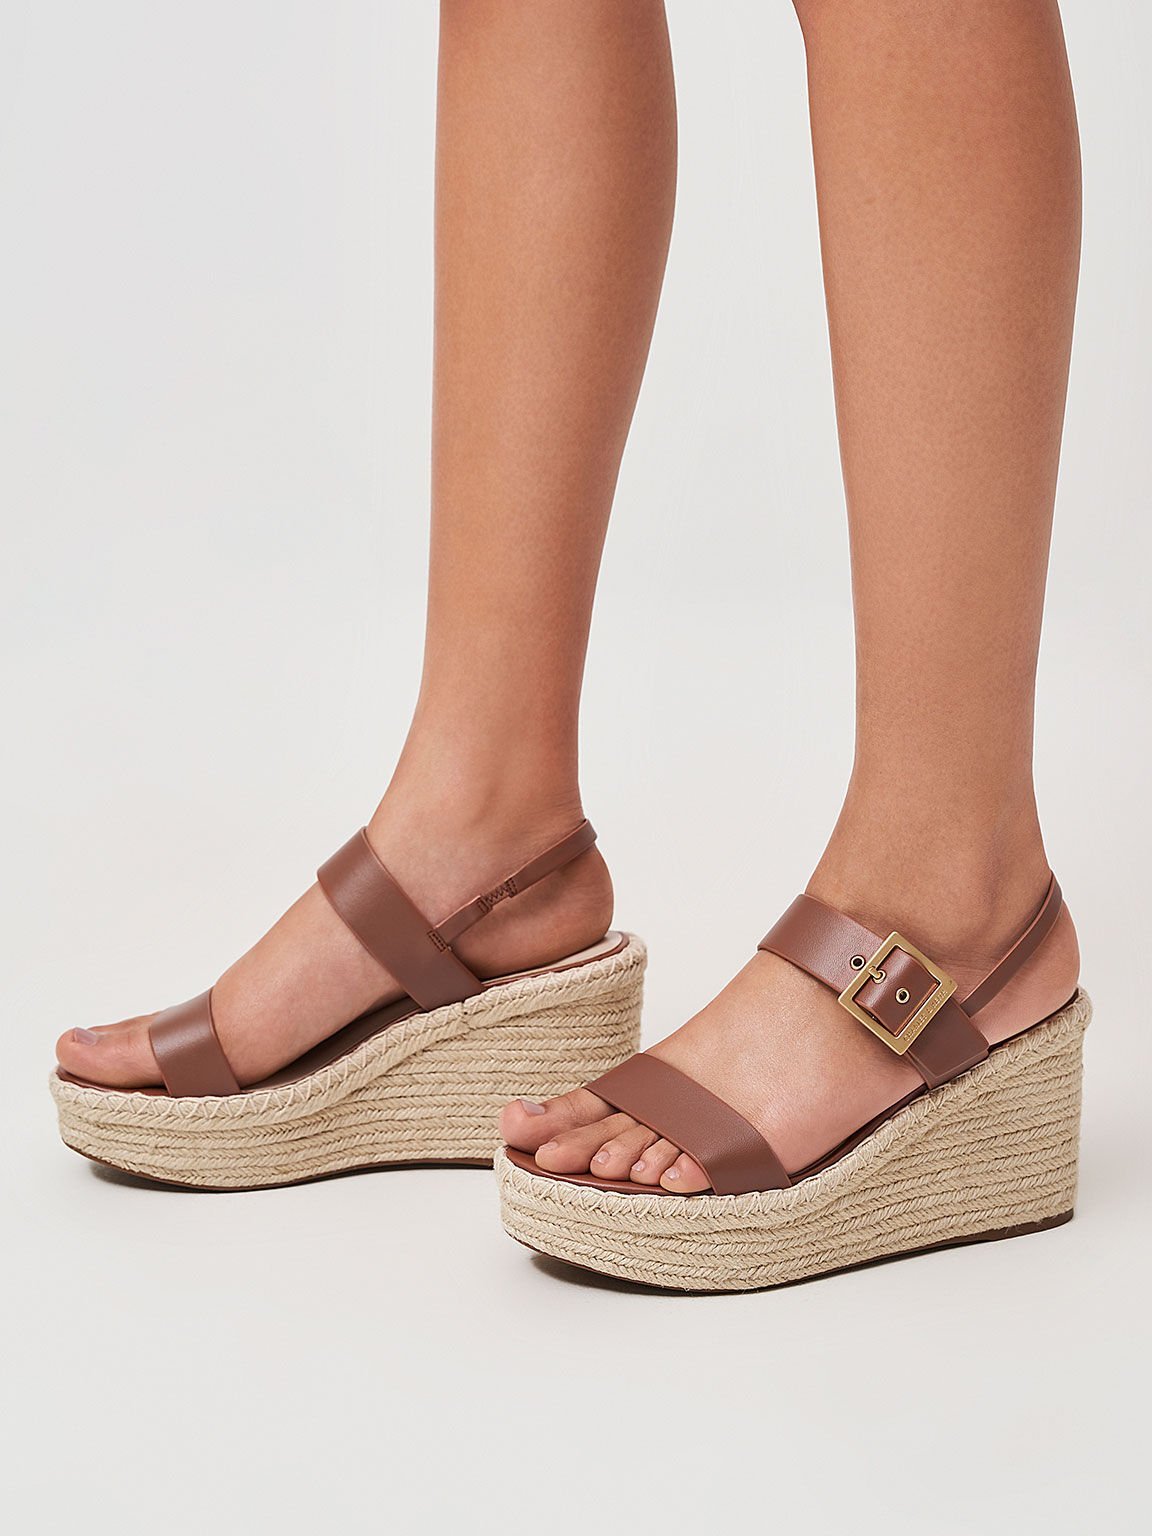 Women’s brown buckled espadrille wedges - CHARLES & KEITH